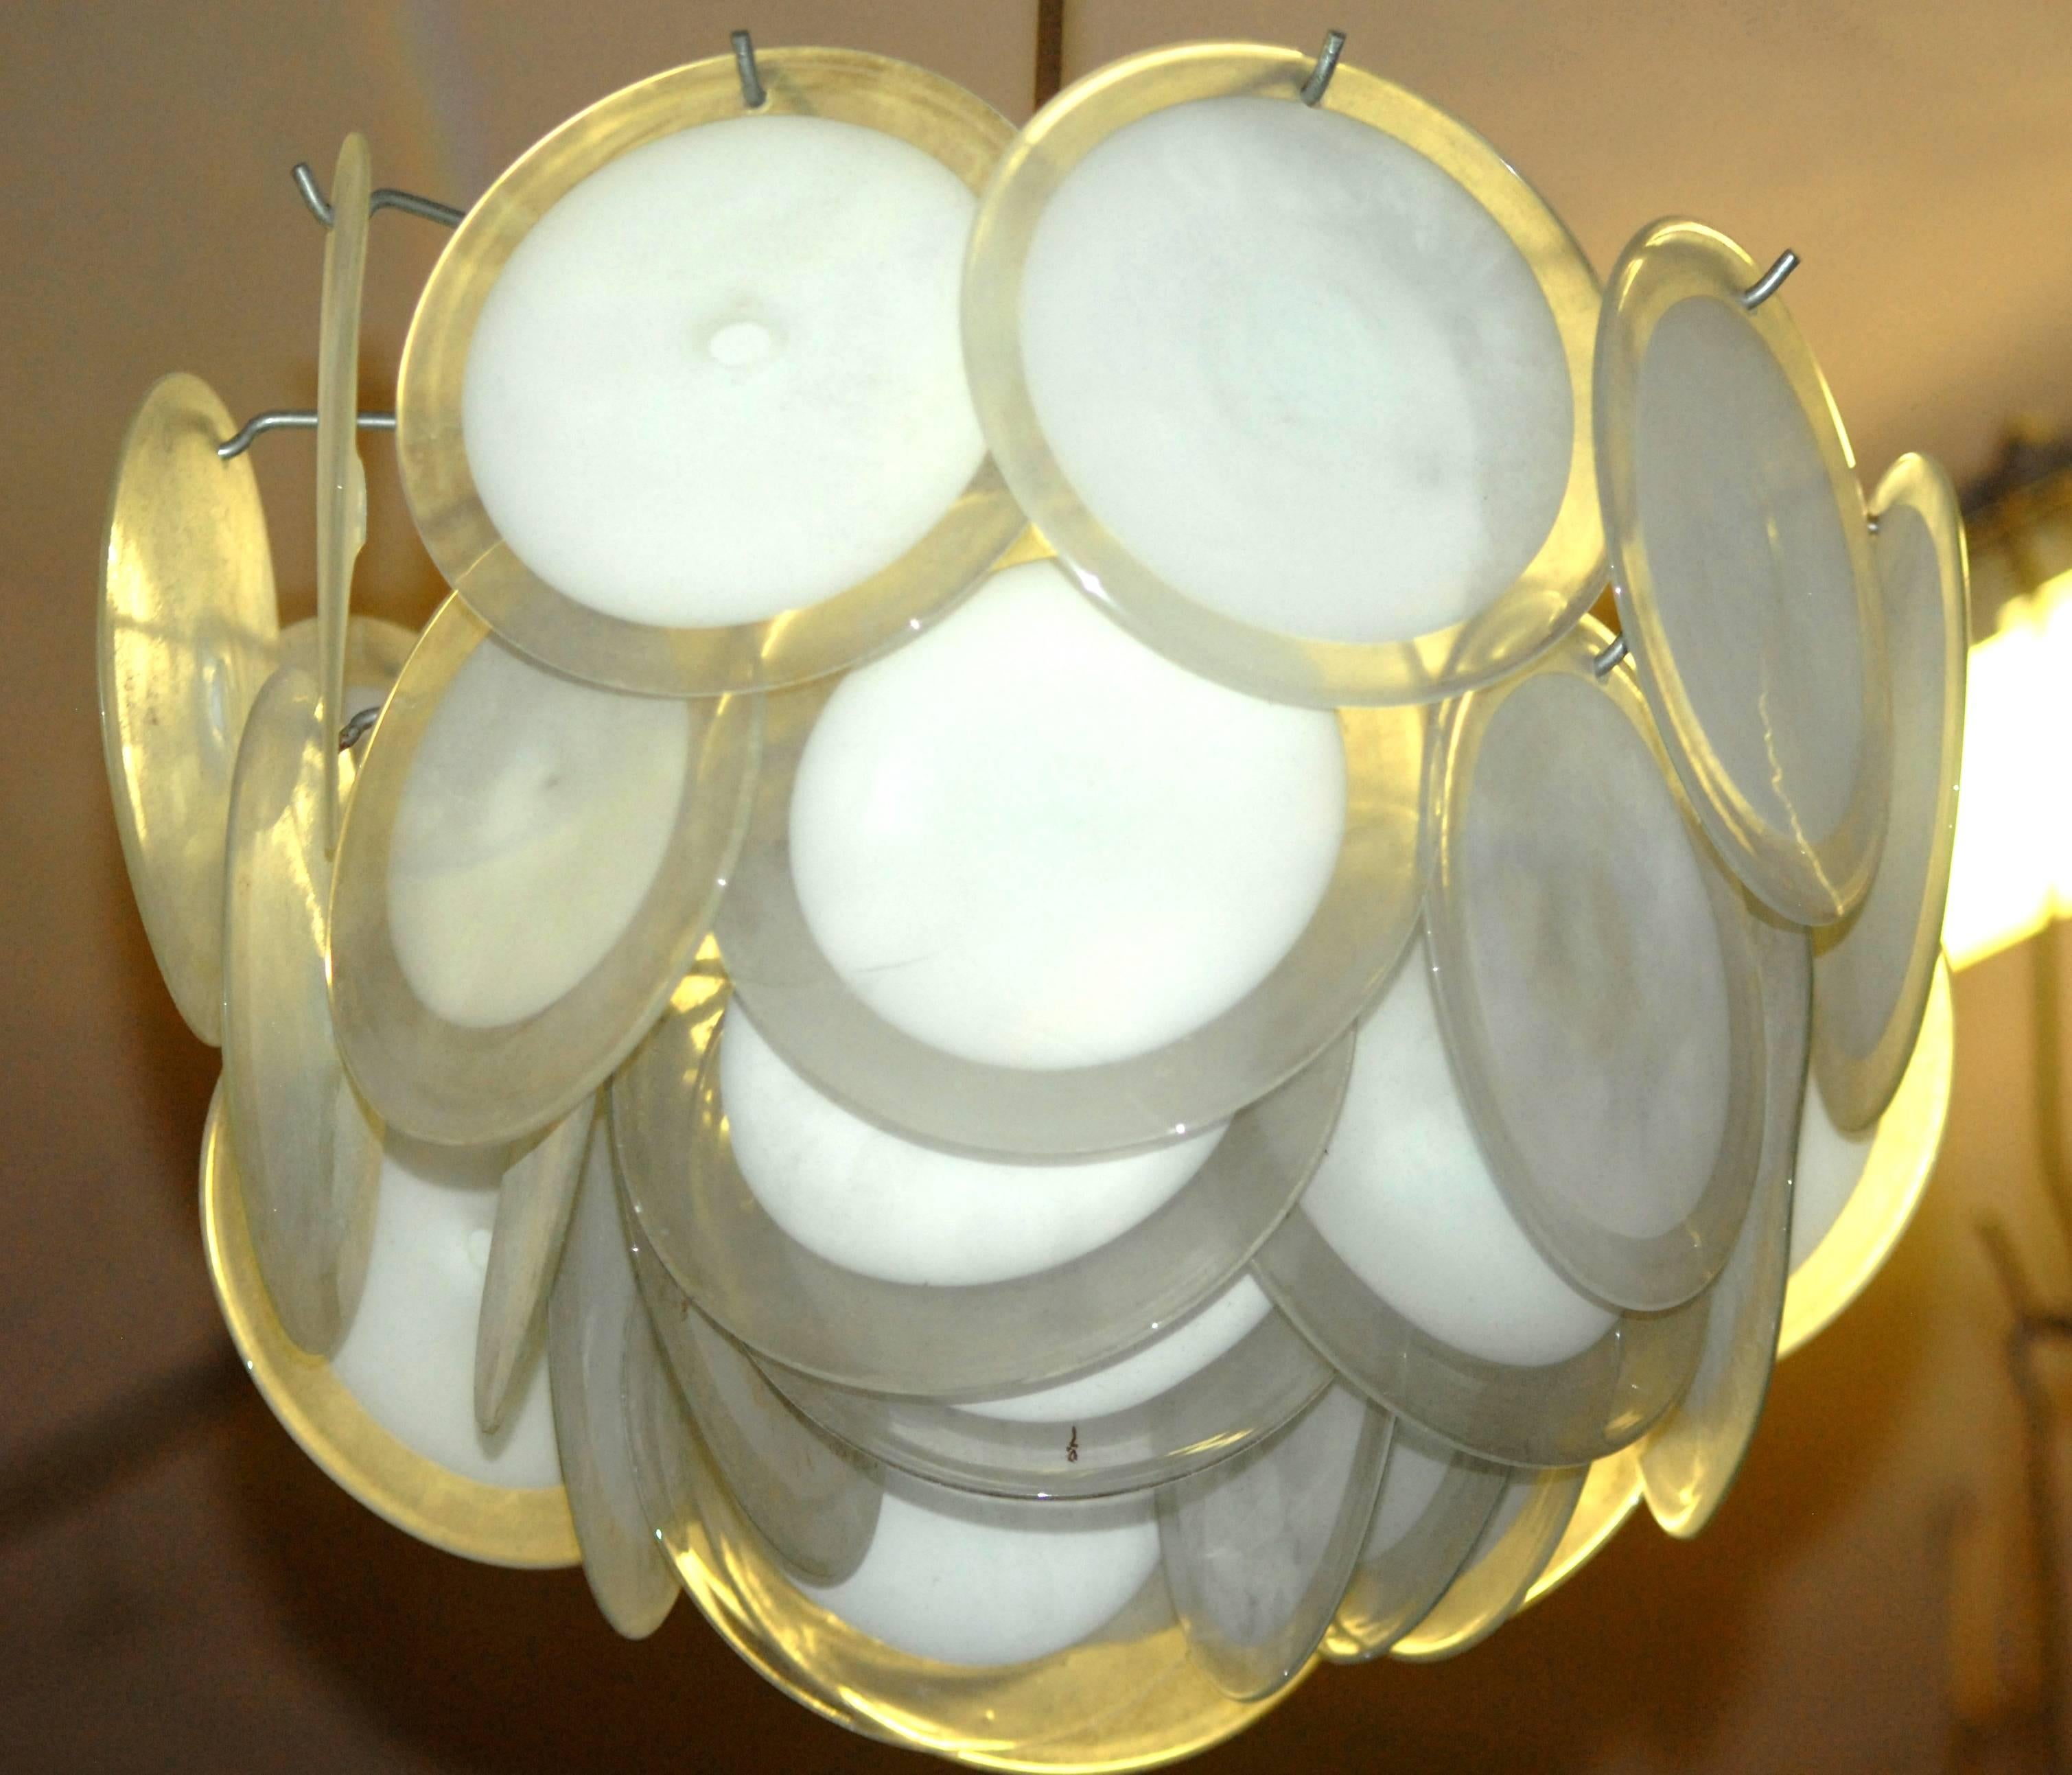 Directly from Alfredo Rossi. Each chandelier carries over 30 discs made with the rullati technique. The same technique is used to make Renaissance windows. White glass Sommerso with clear glass, and then hand opened and flattened. Pontil mark still